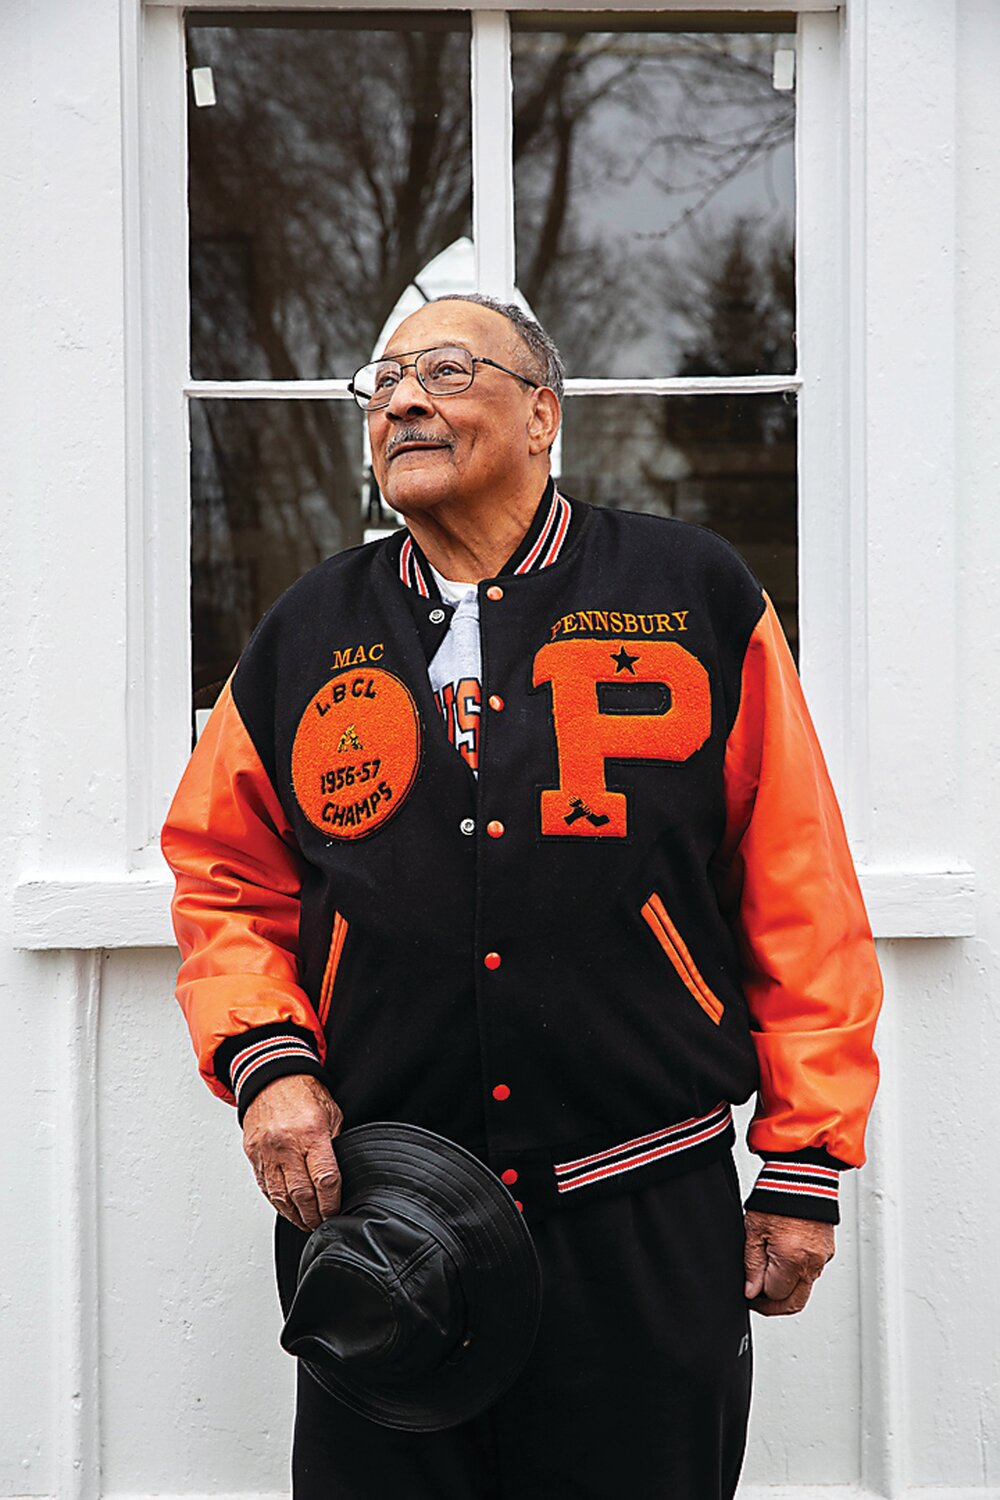 Frank McIntyre Sr., a former resident of Yardley’s South Canal Street, stands outside of Gather Place Museum, formerly the African Methodist Episcopal (A.M.E.) Church of Yardley.